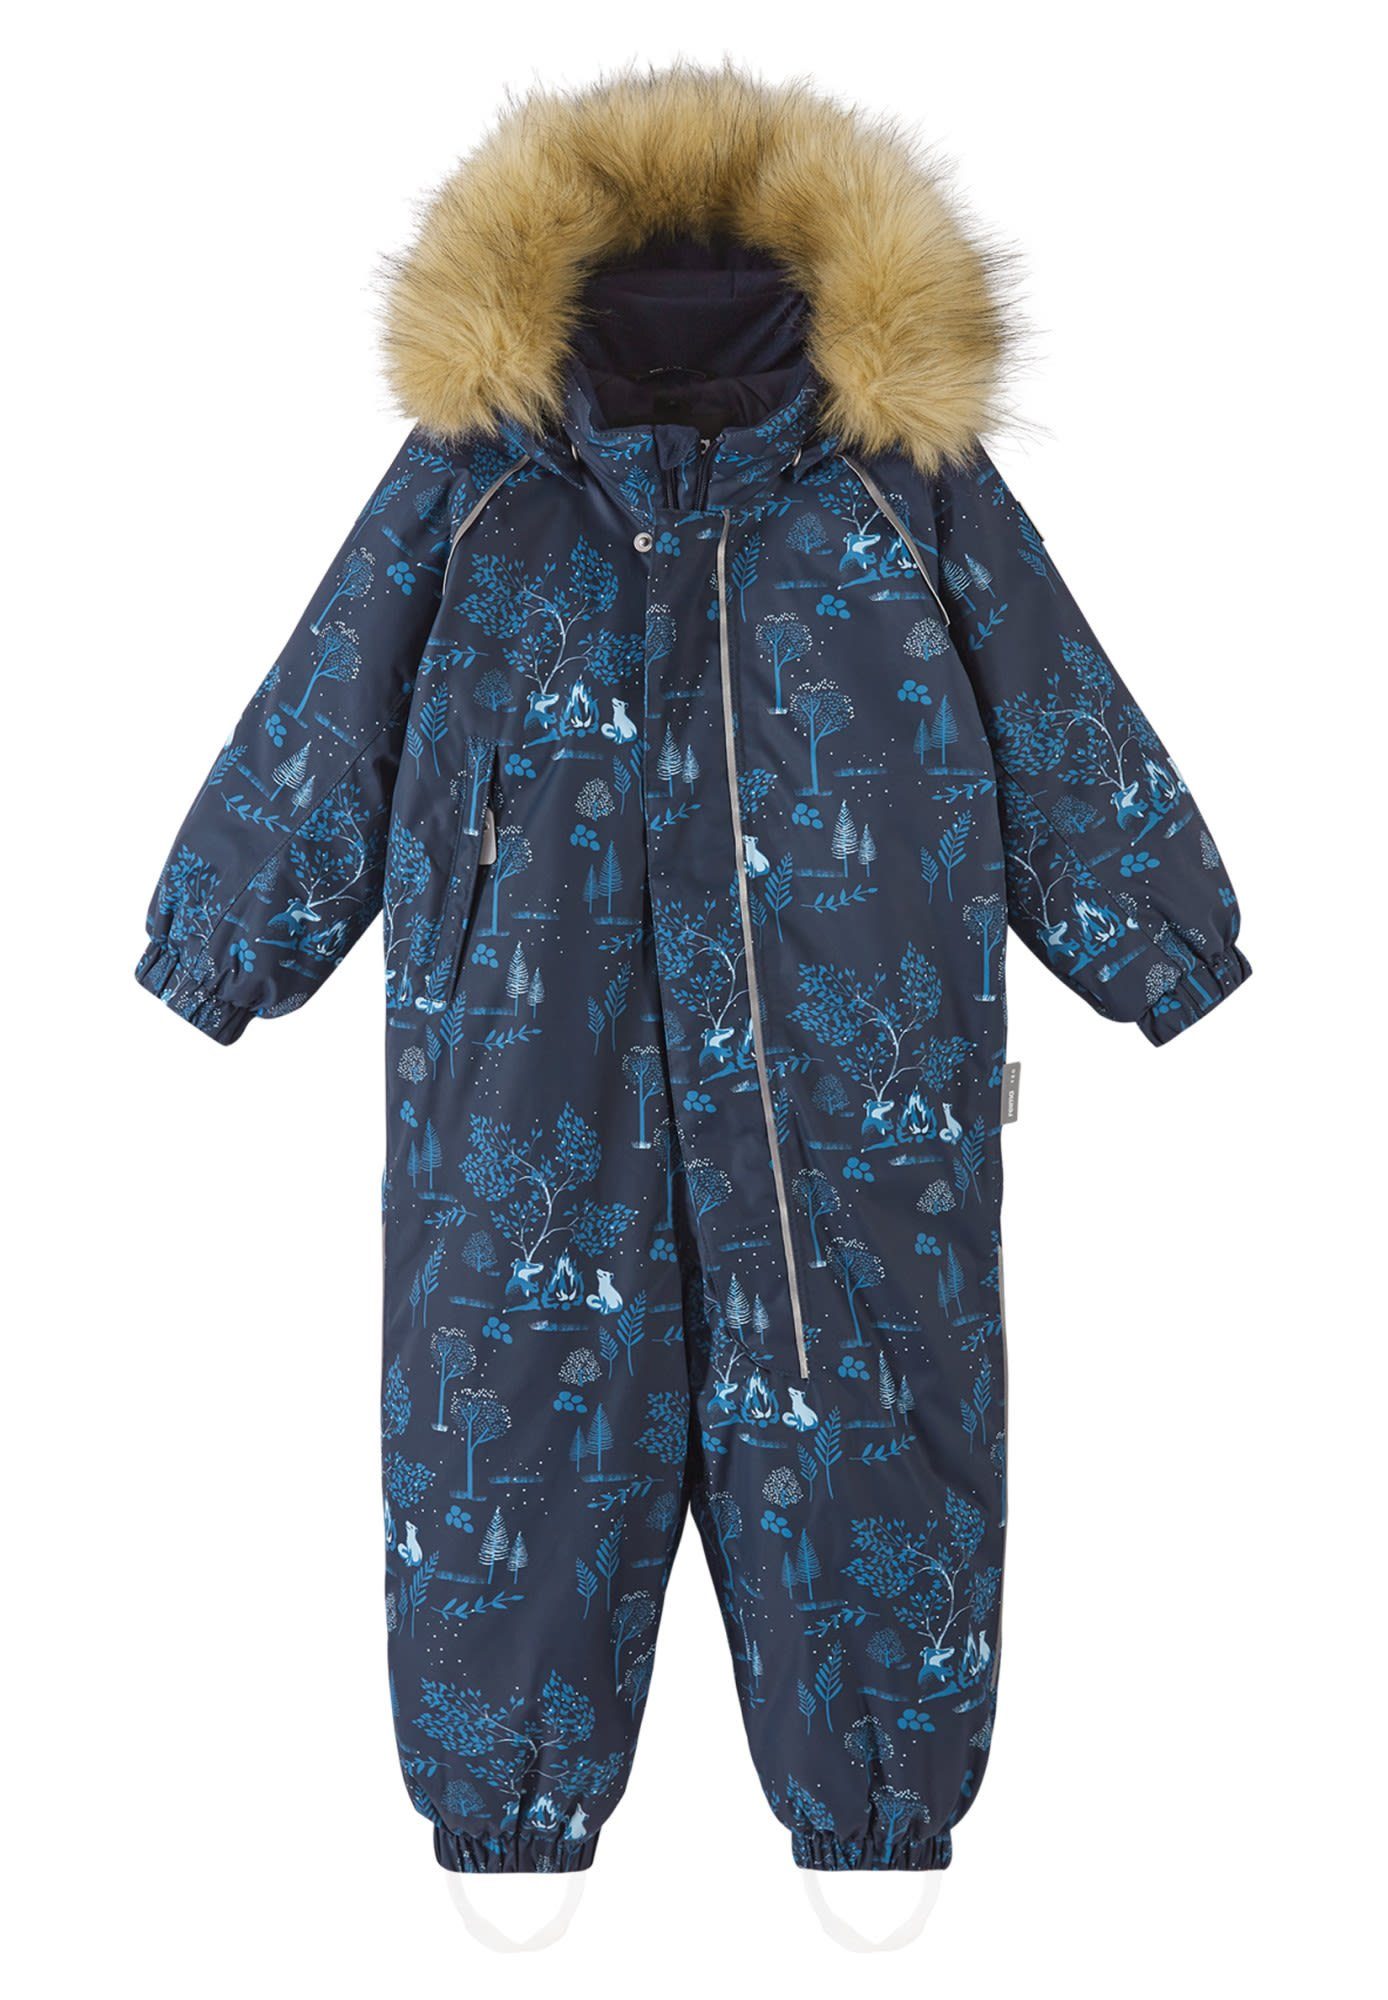 reima Overall Reima Toddlers Lappi Winter Overall Kinder Navy